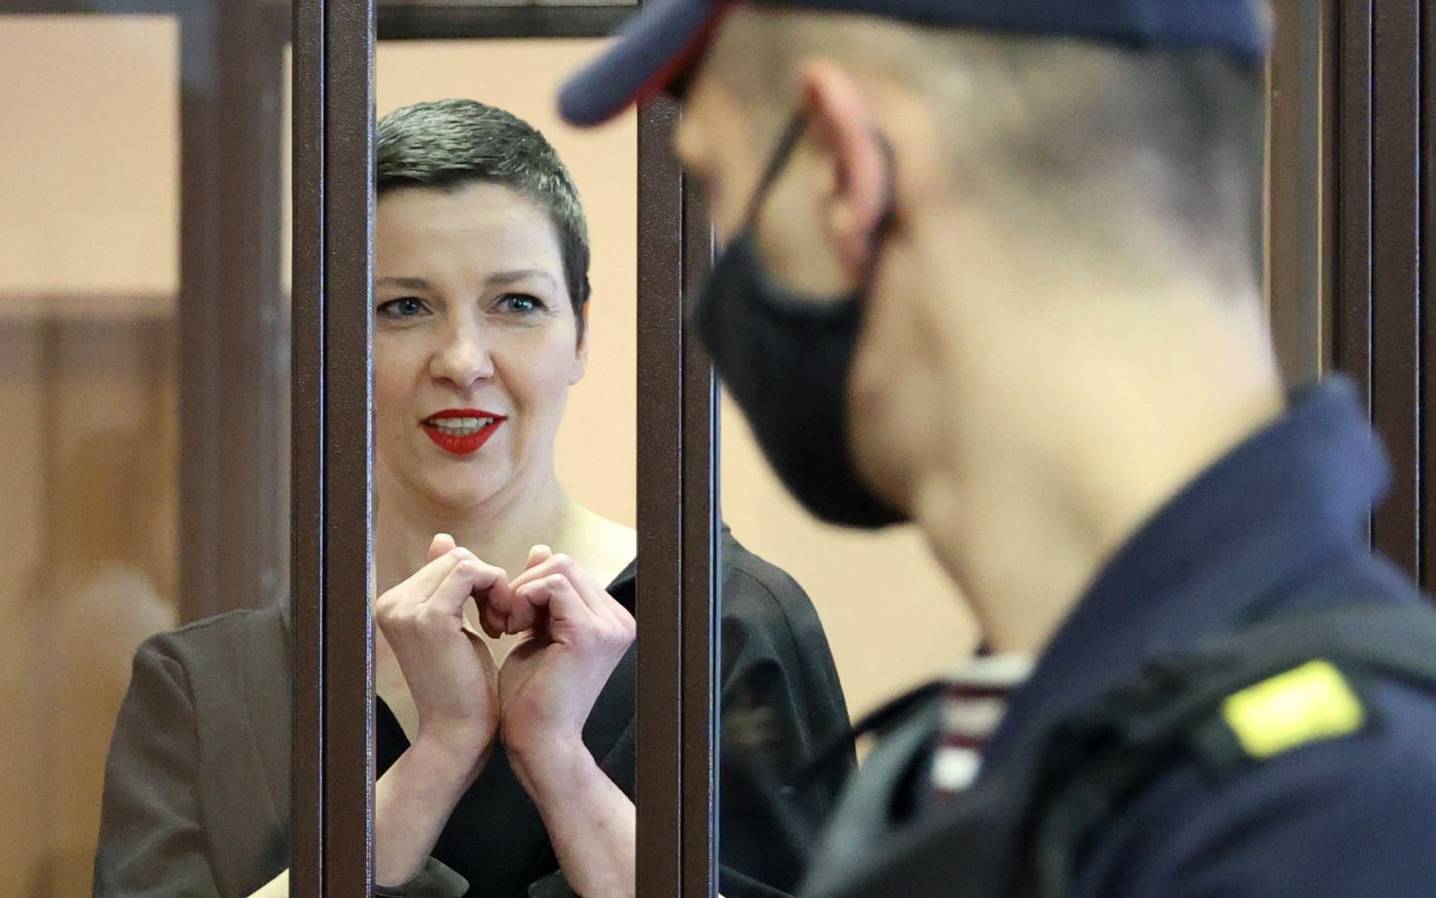 Maria Kolesnikova, the last remaining protest leader still in Belarus, gestures making a heart shape inside the defendants' cage during her verdict hearing on charges of undermining national security, conspiring to seize power and creating an extremist group, on September 6, 2021 in Minsk. - A court in Belarus sentenced key opposition figure Maria Kolesnikova -- who led mass protests against President Alexander Lukashenko last year -- to 11 years in prison on national security charges. Kolesnikova, a 39-year-old former flute player in the country's philharmonic orchestra and the only protest leader still in Belarus, has become a symbol of the protest movement in Belarus where Lukashenko, in power since 1994, has been cracking down on opponents since unprecedented protests erupted after last year's elections, deemed unfair by the West. (Photo by Ramil NASIBULIN / BELTA / AFP) / Belarus OUT / BELARUS OUT